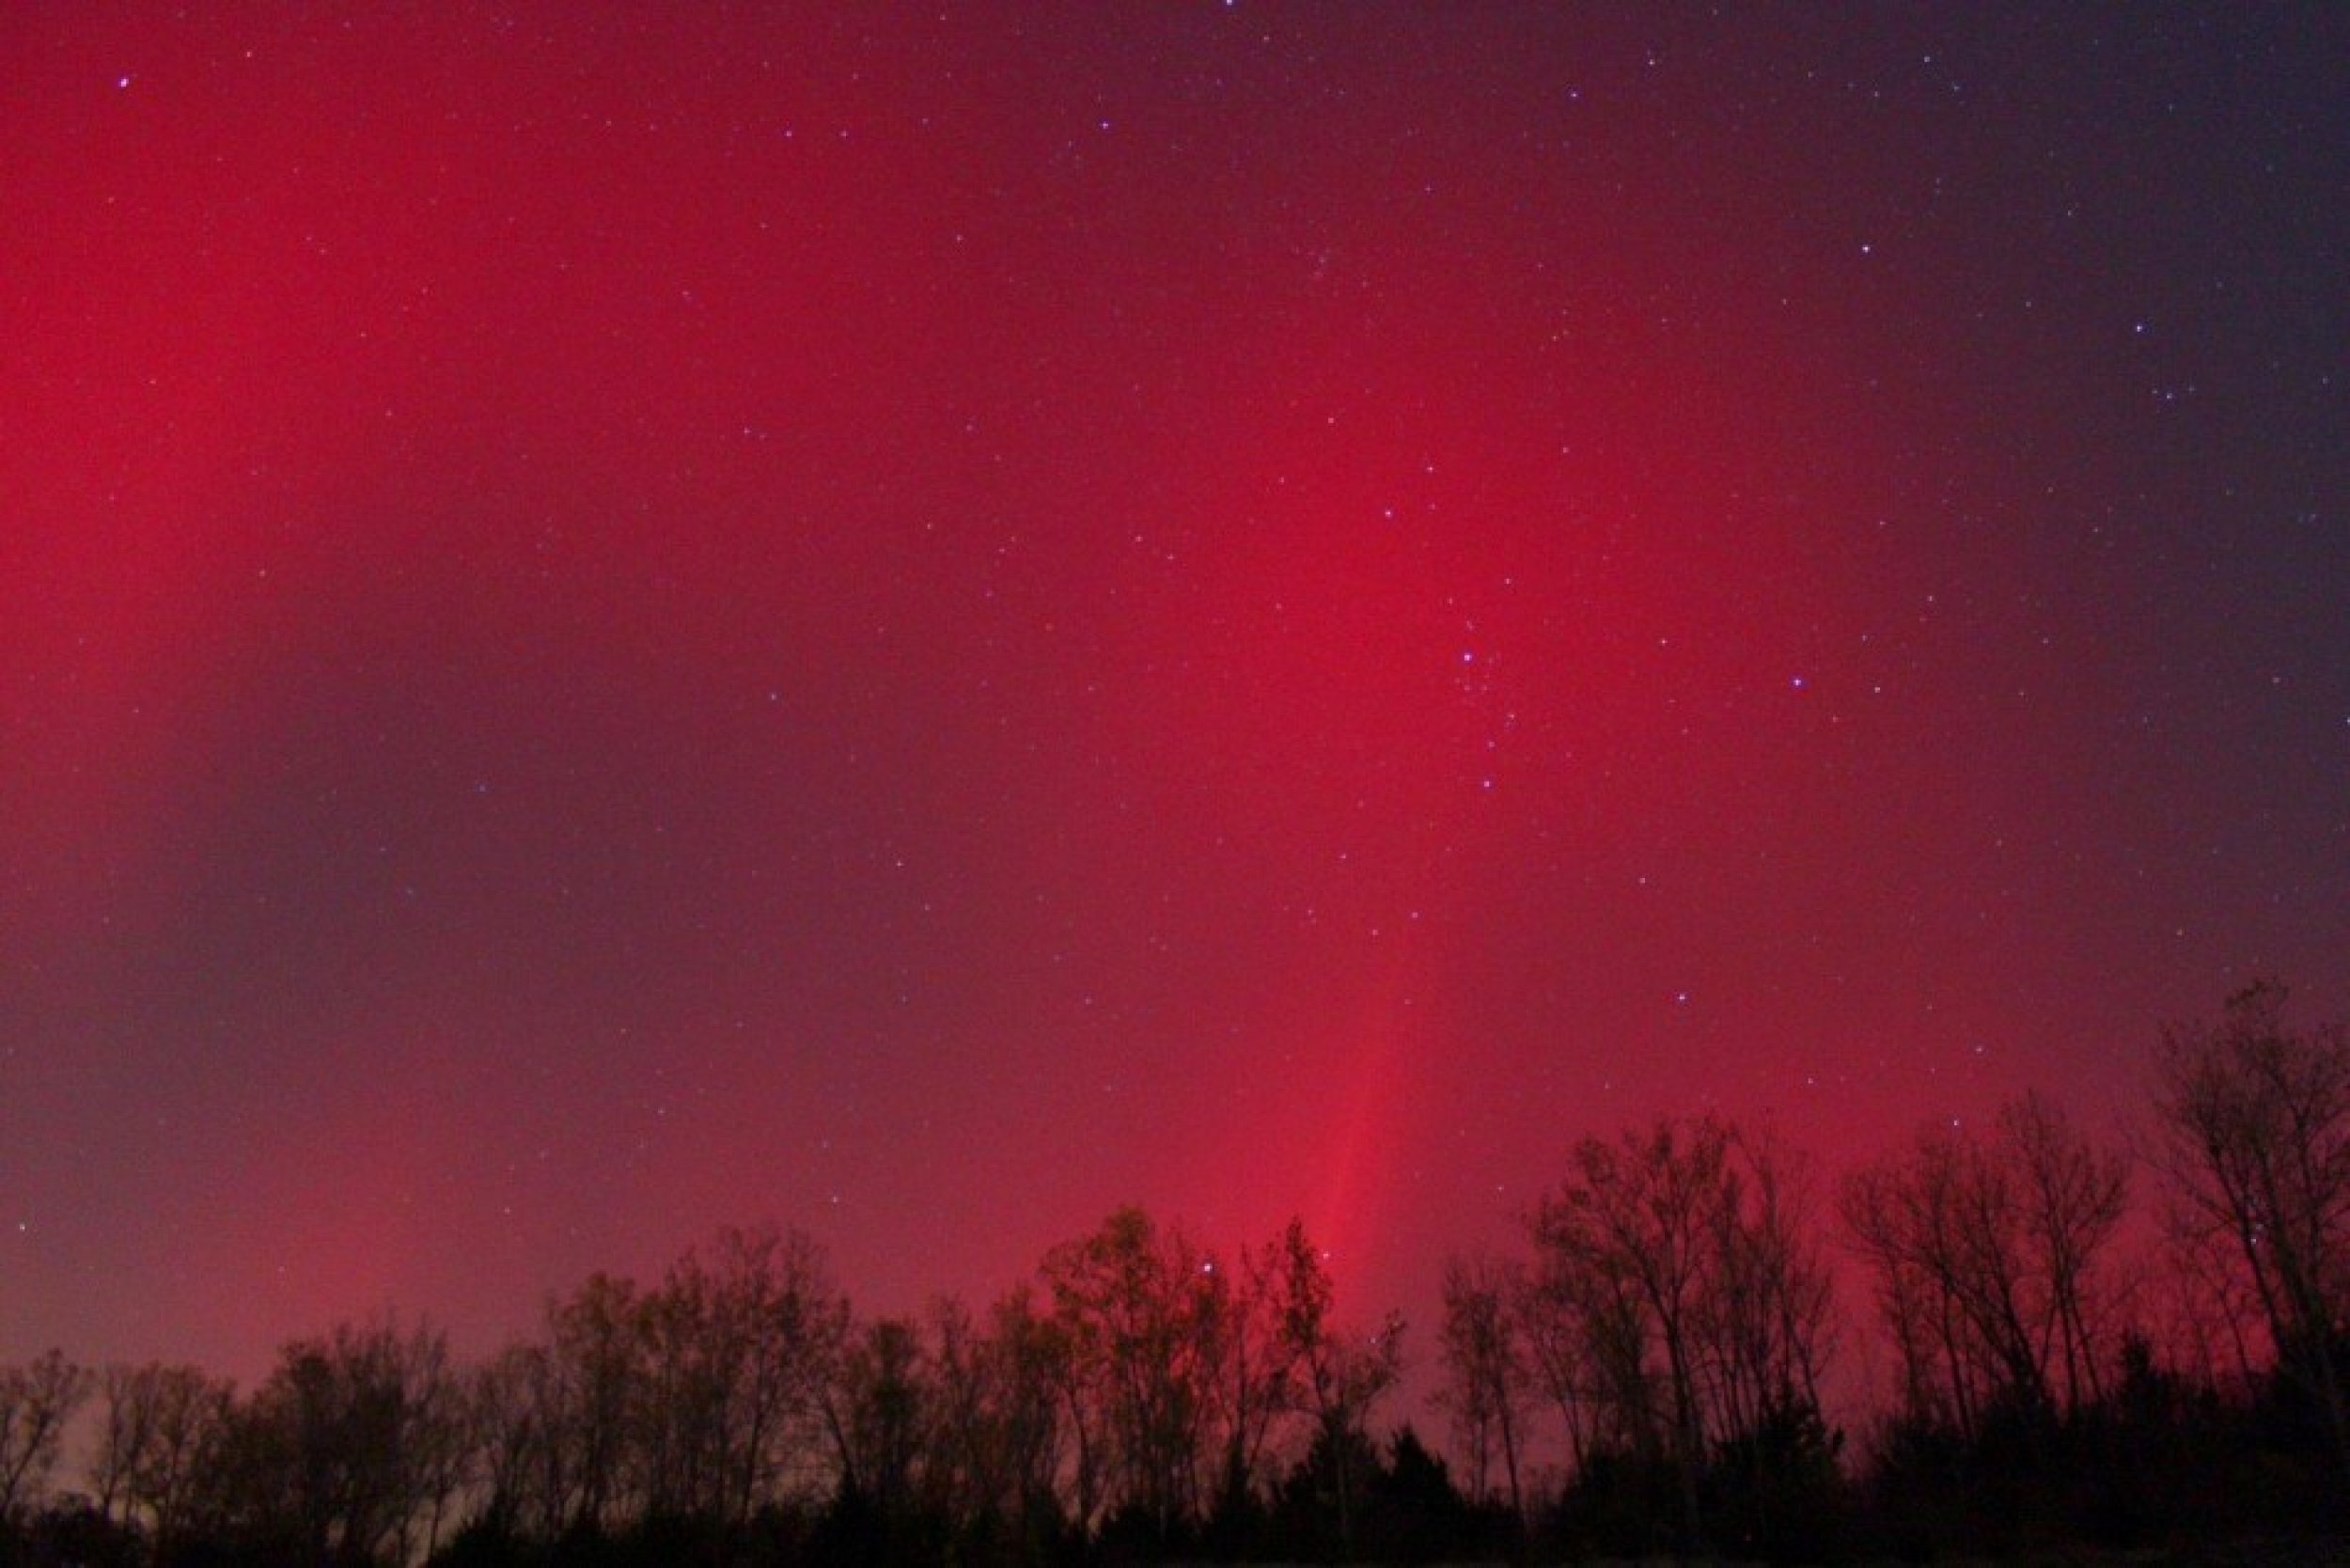 Another view of an all-red aurora captured in Independence, Mo., on October 24, 2011.